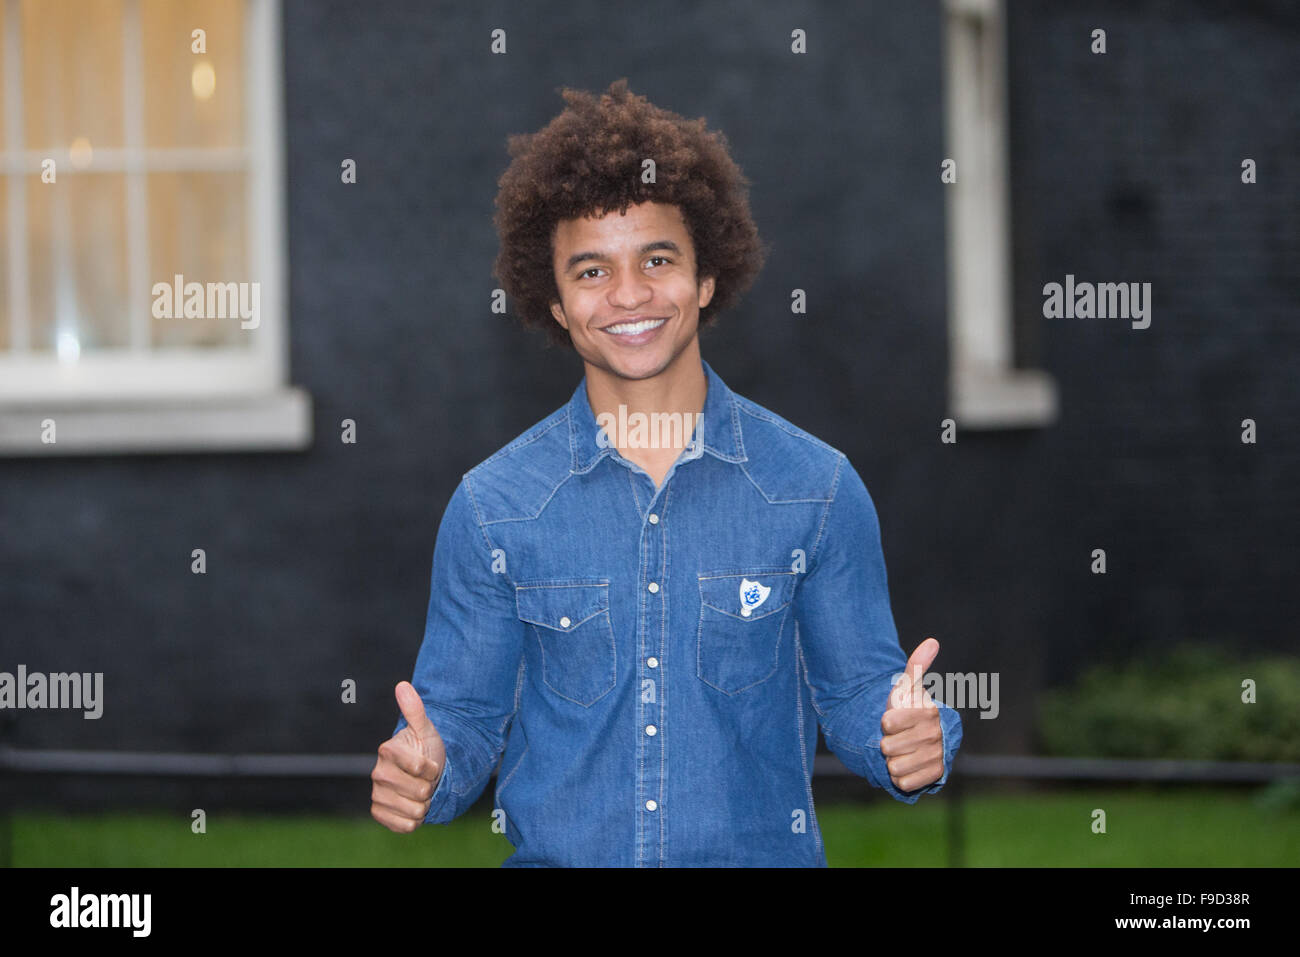 Radzi Chinyanganya,one of the presenters of  Blue Peter,arrives at Downing Street for the Starlight charity Christmas party Stock Photo